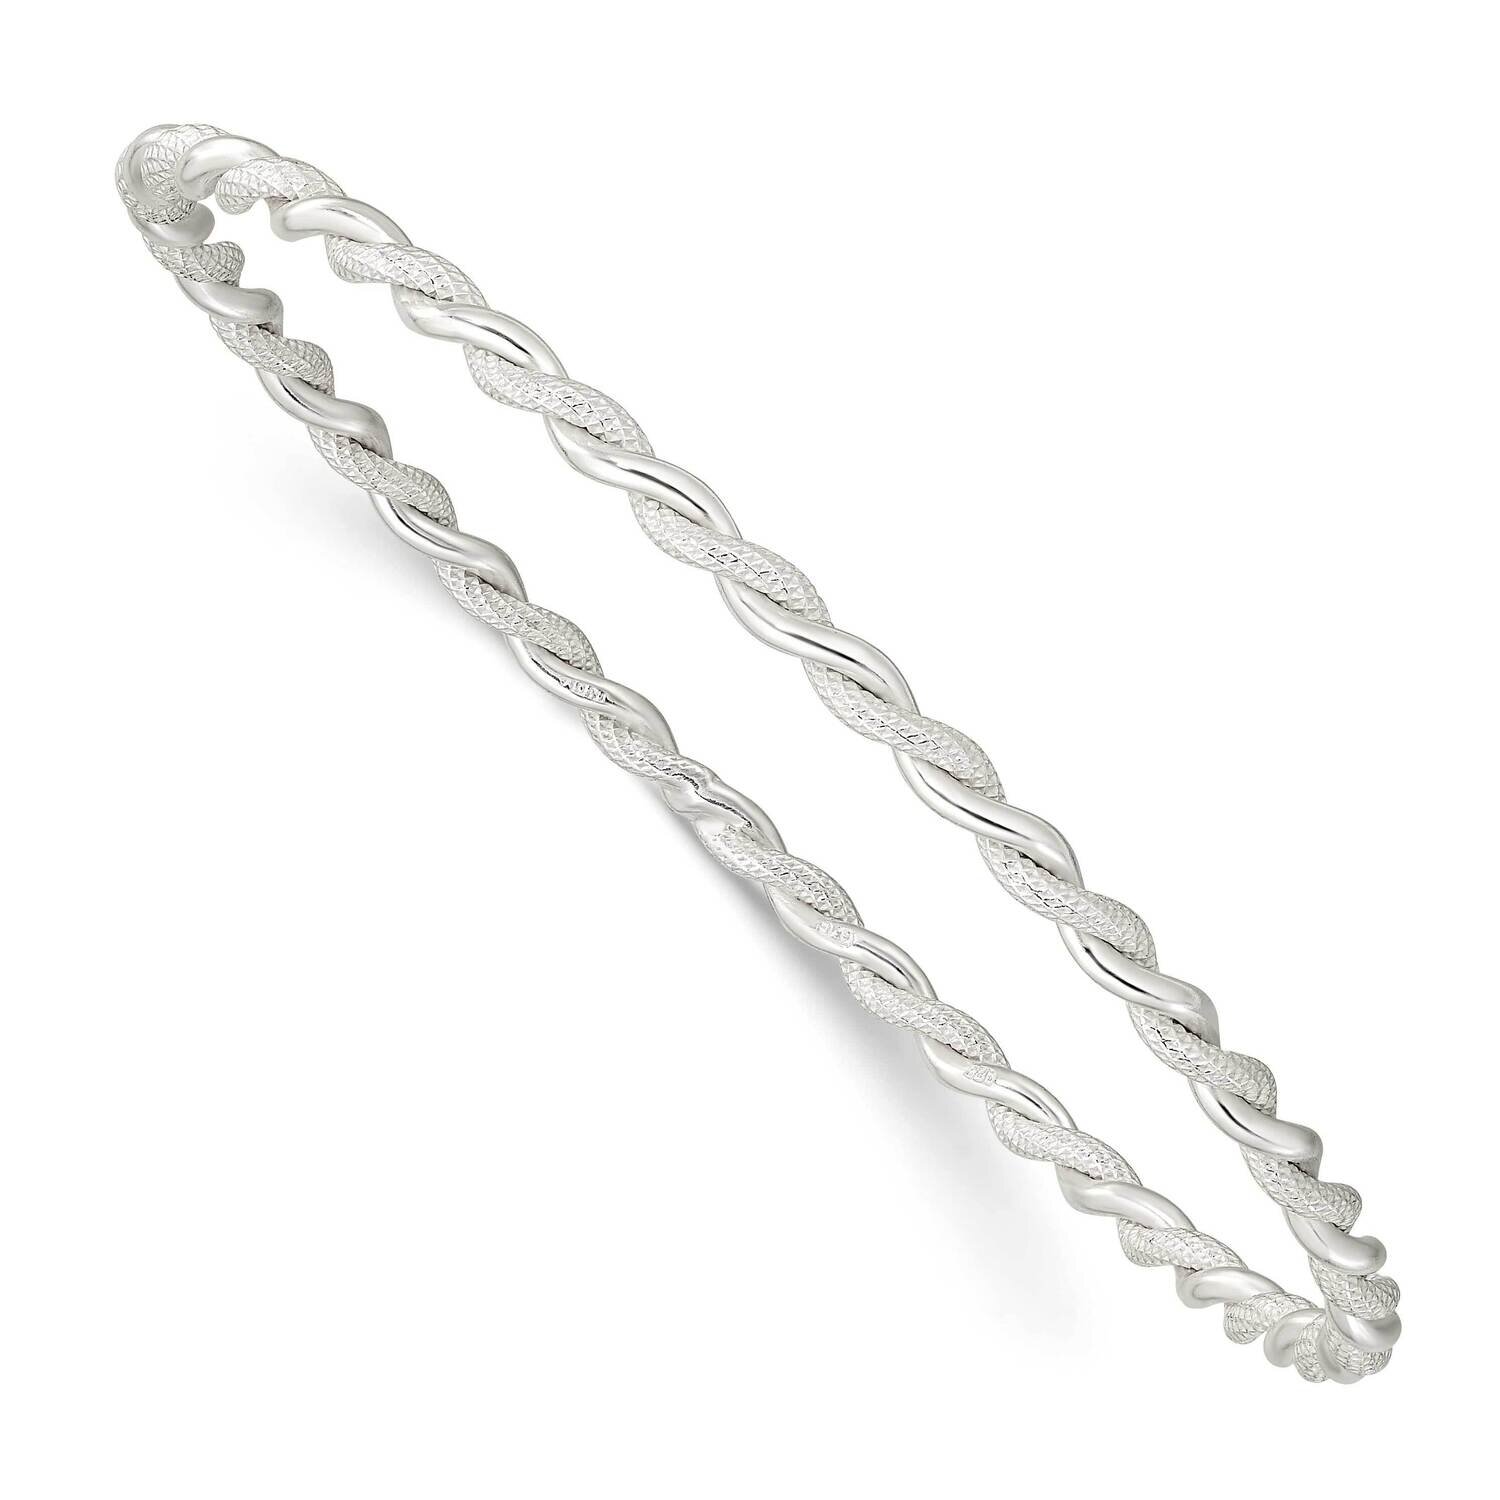 Textured Twisted 3mm Slip-On Bangle Sterling Silver Polished QB1397